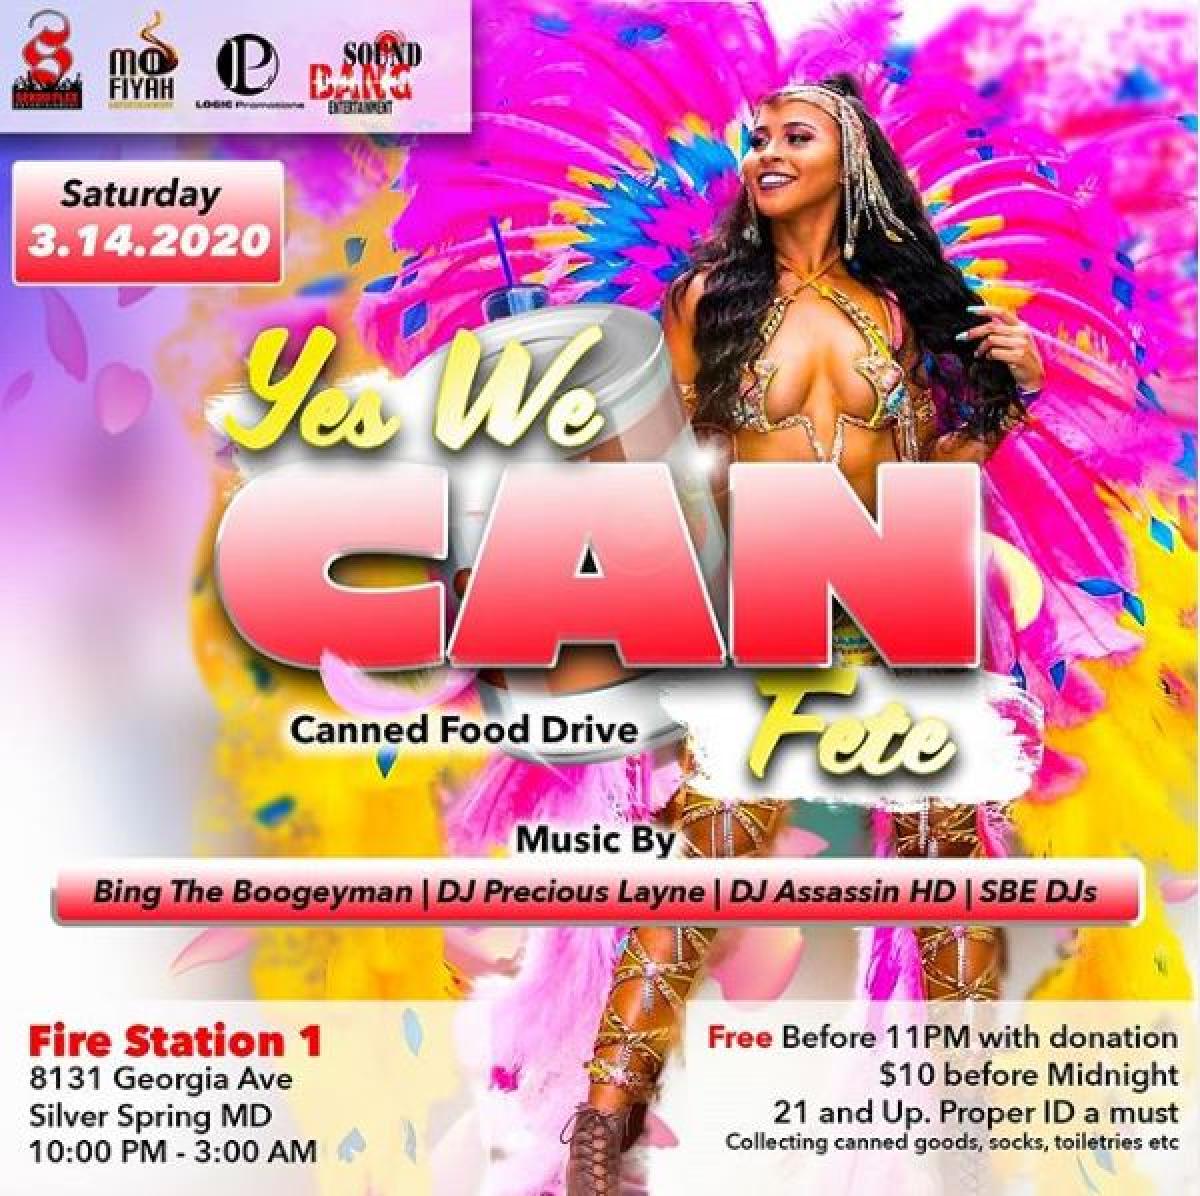 Yes We Can Fete flyer or graphic.